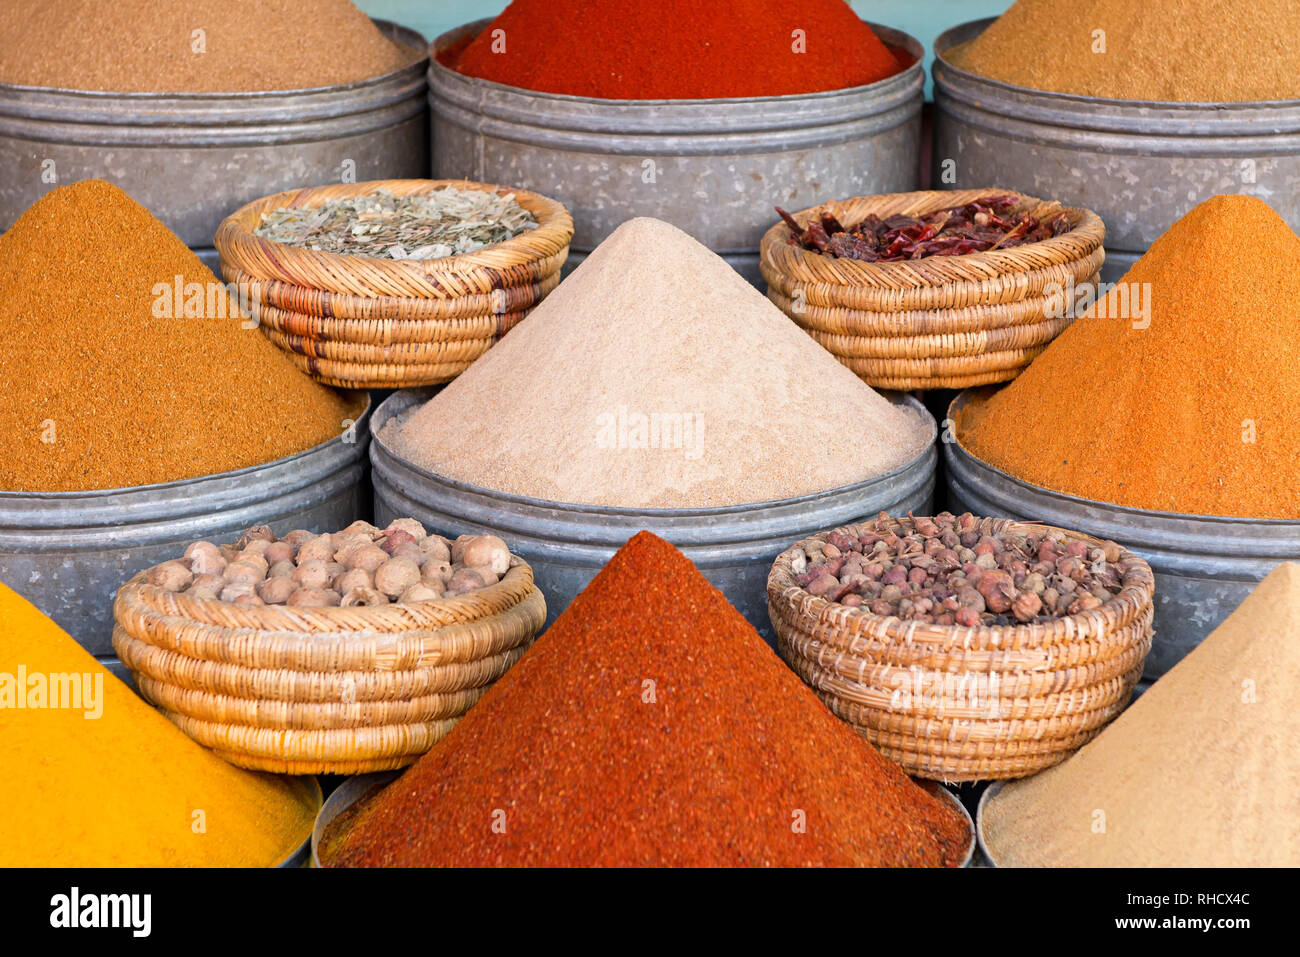 Beautiful arrangement of spices, herbs and nuts Stock Photo